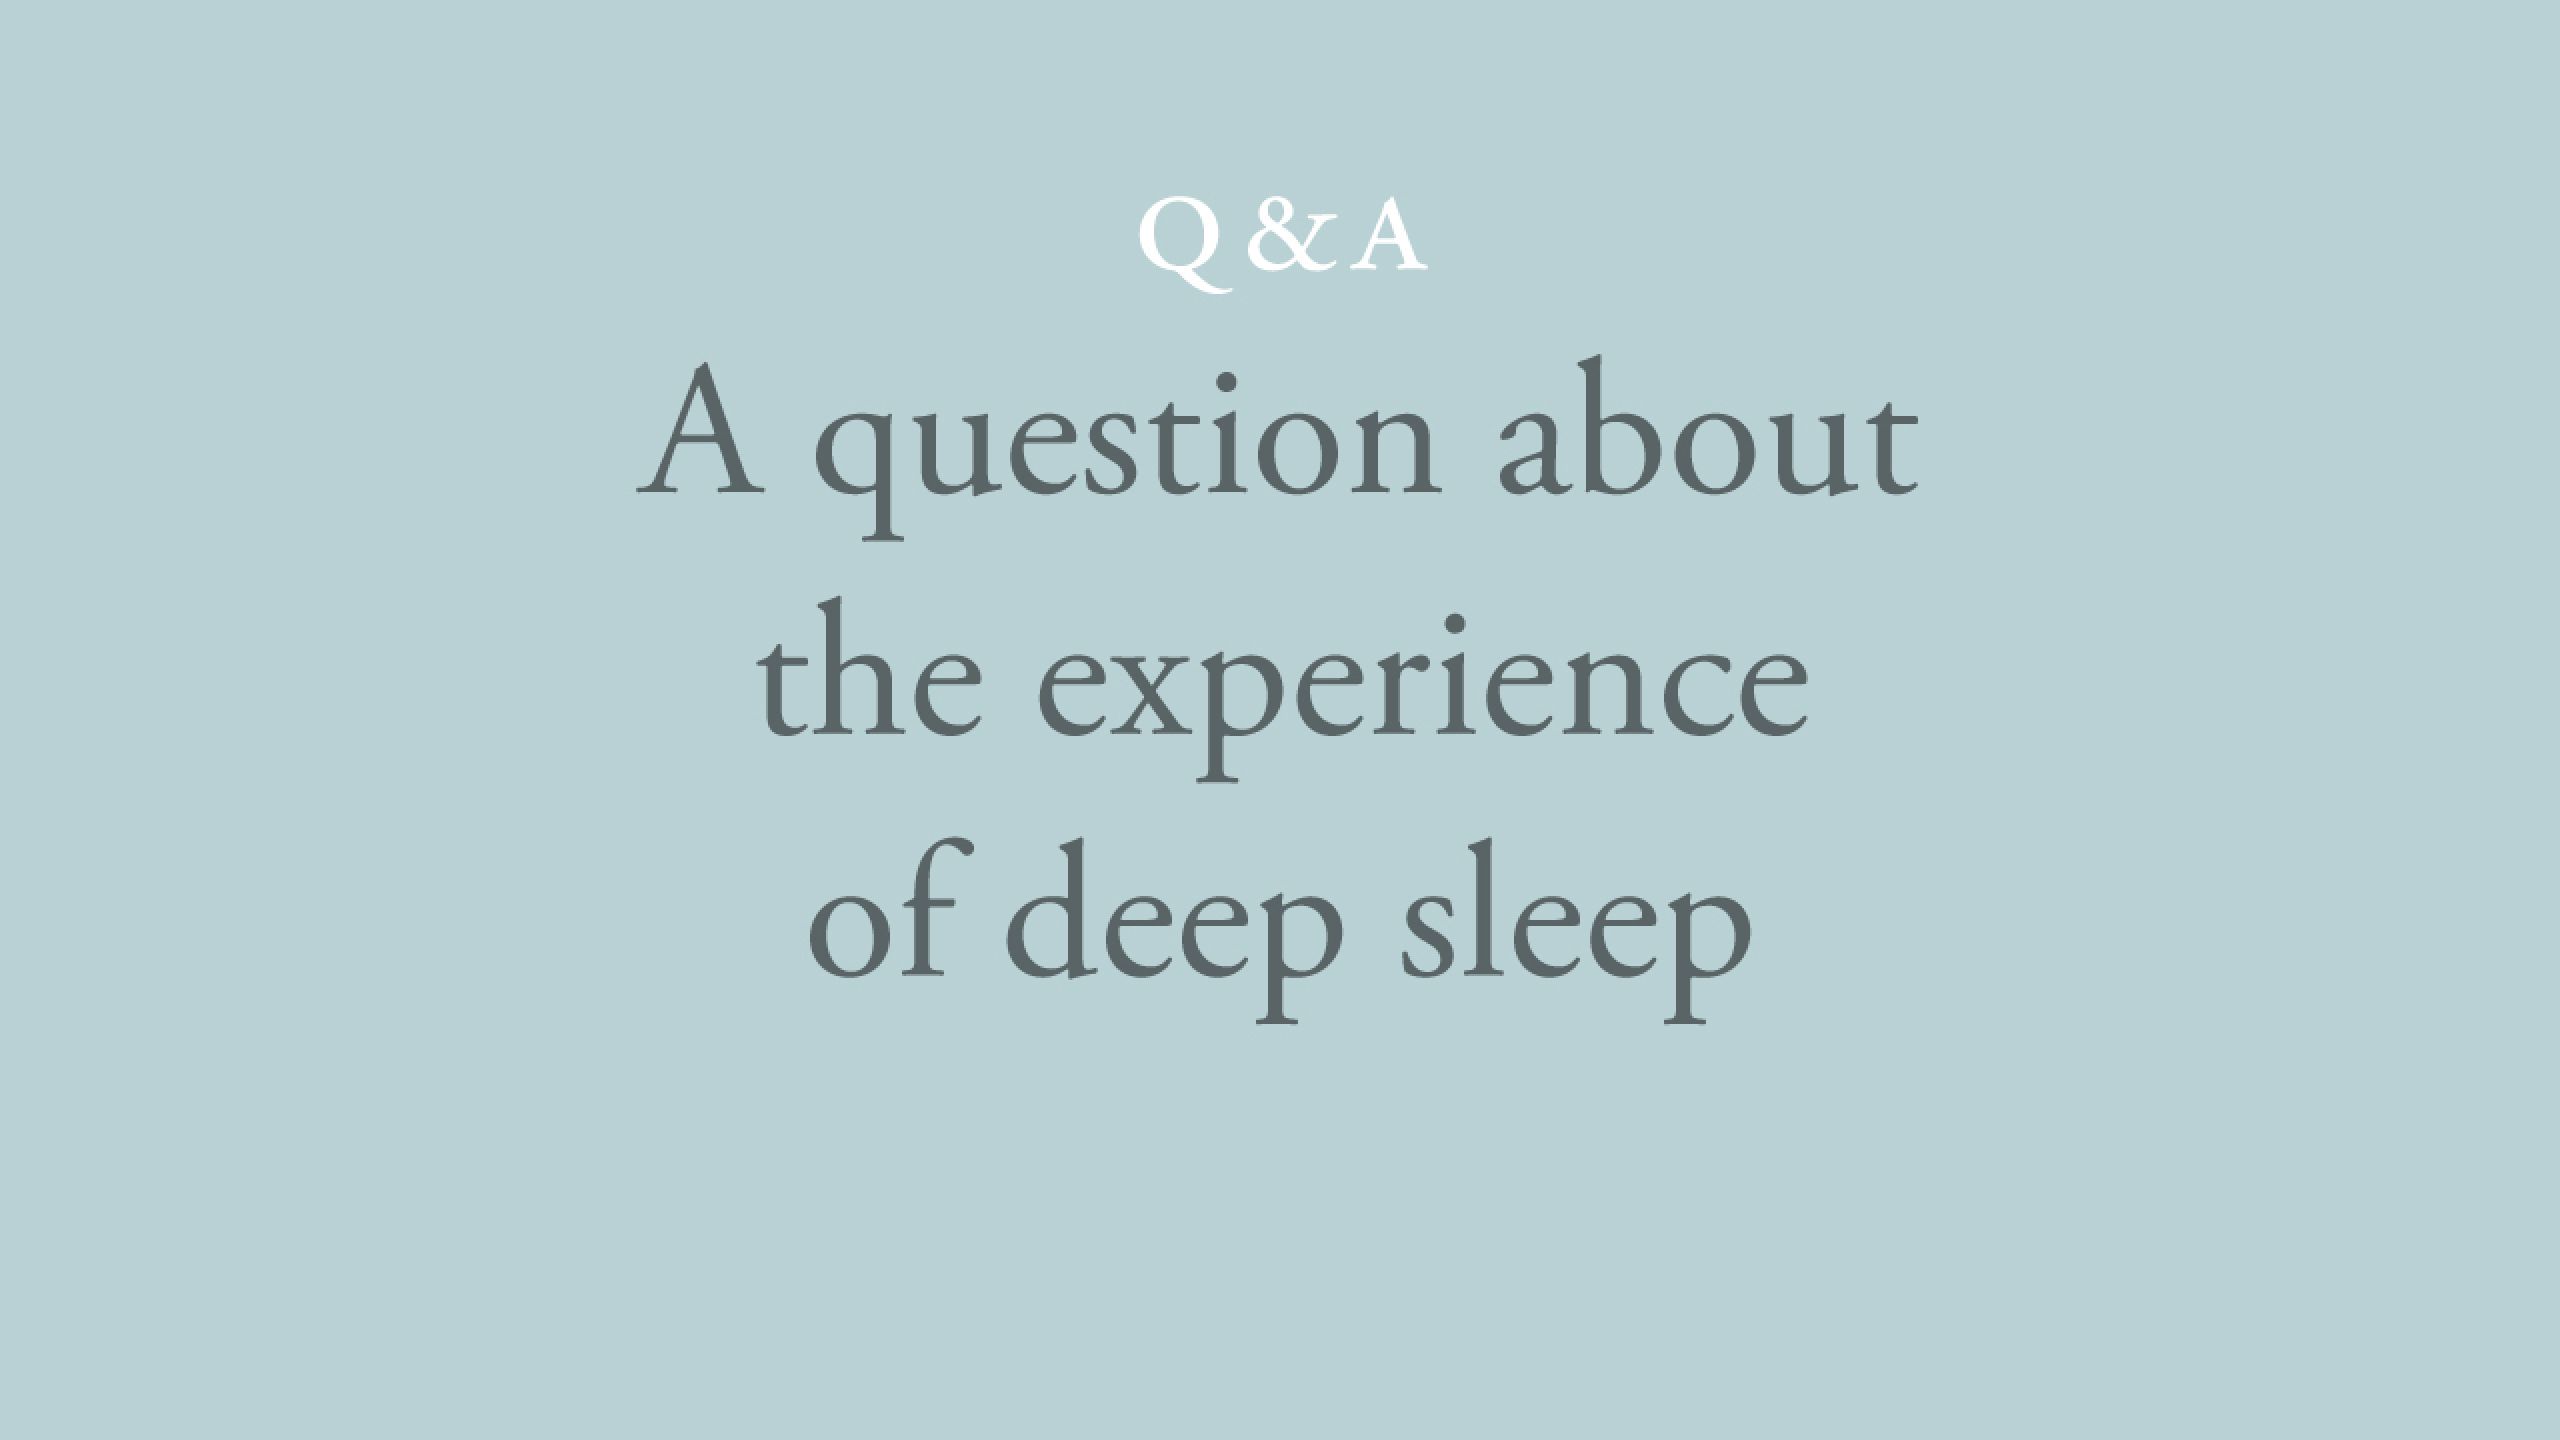 What is the experience of deep sleep?